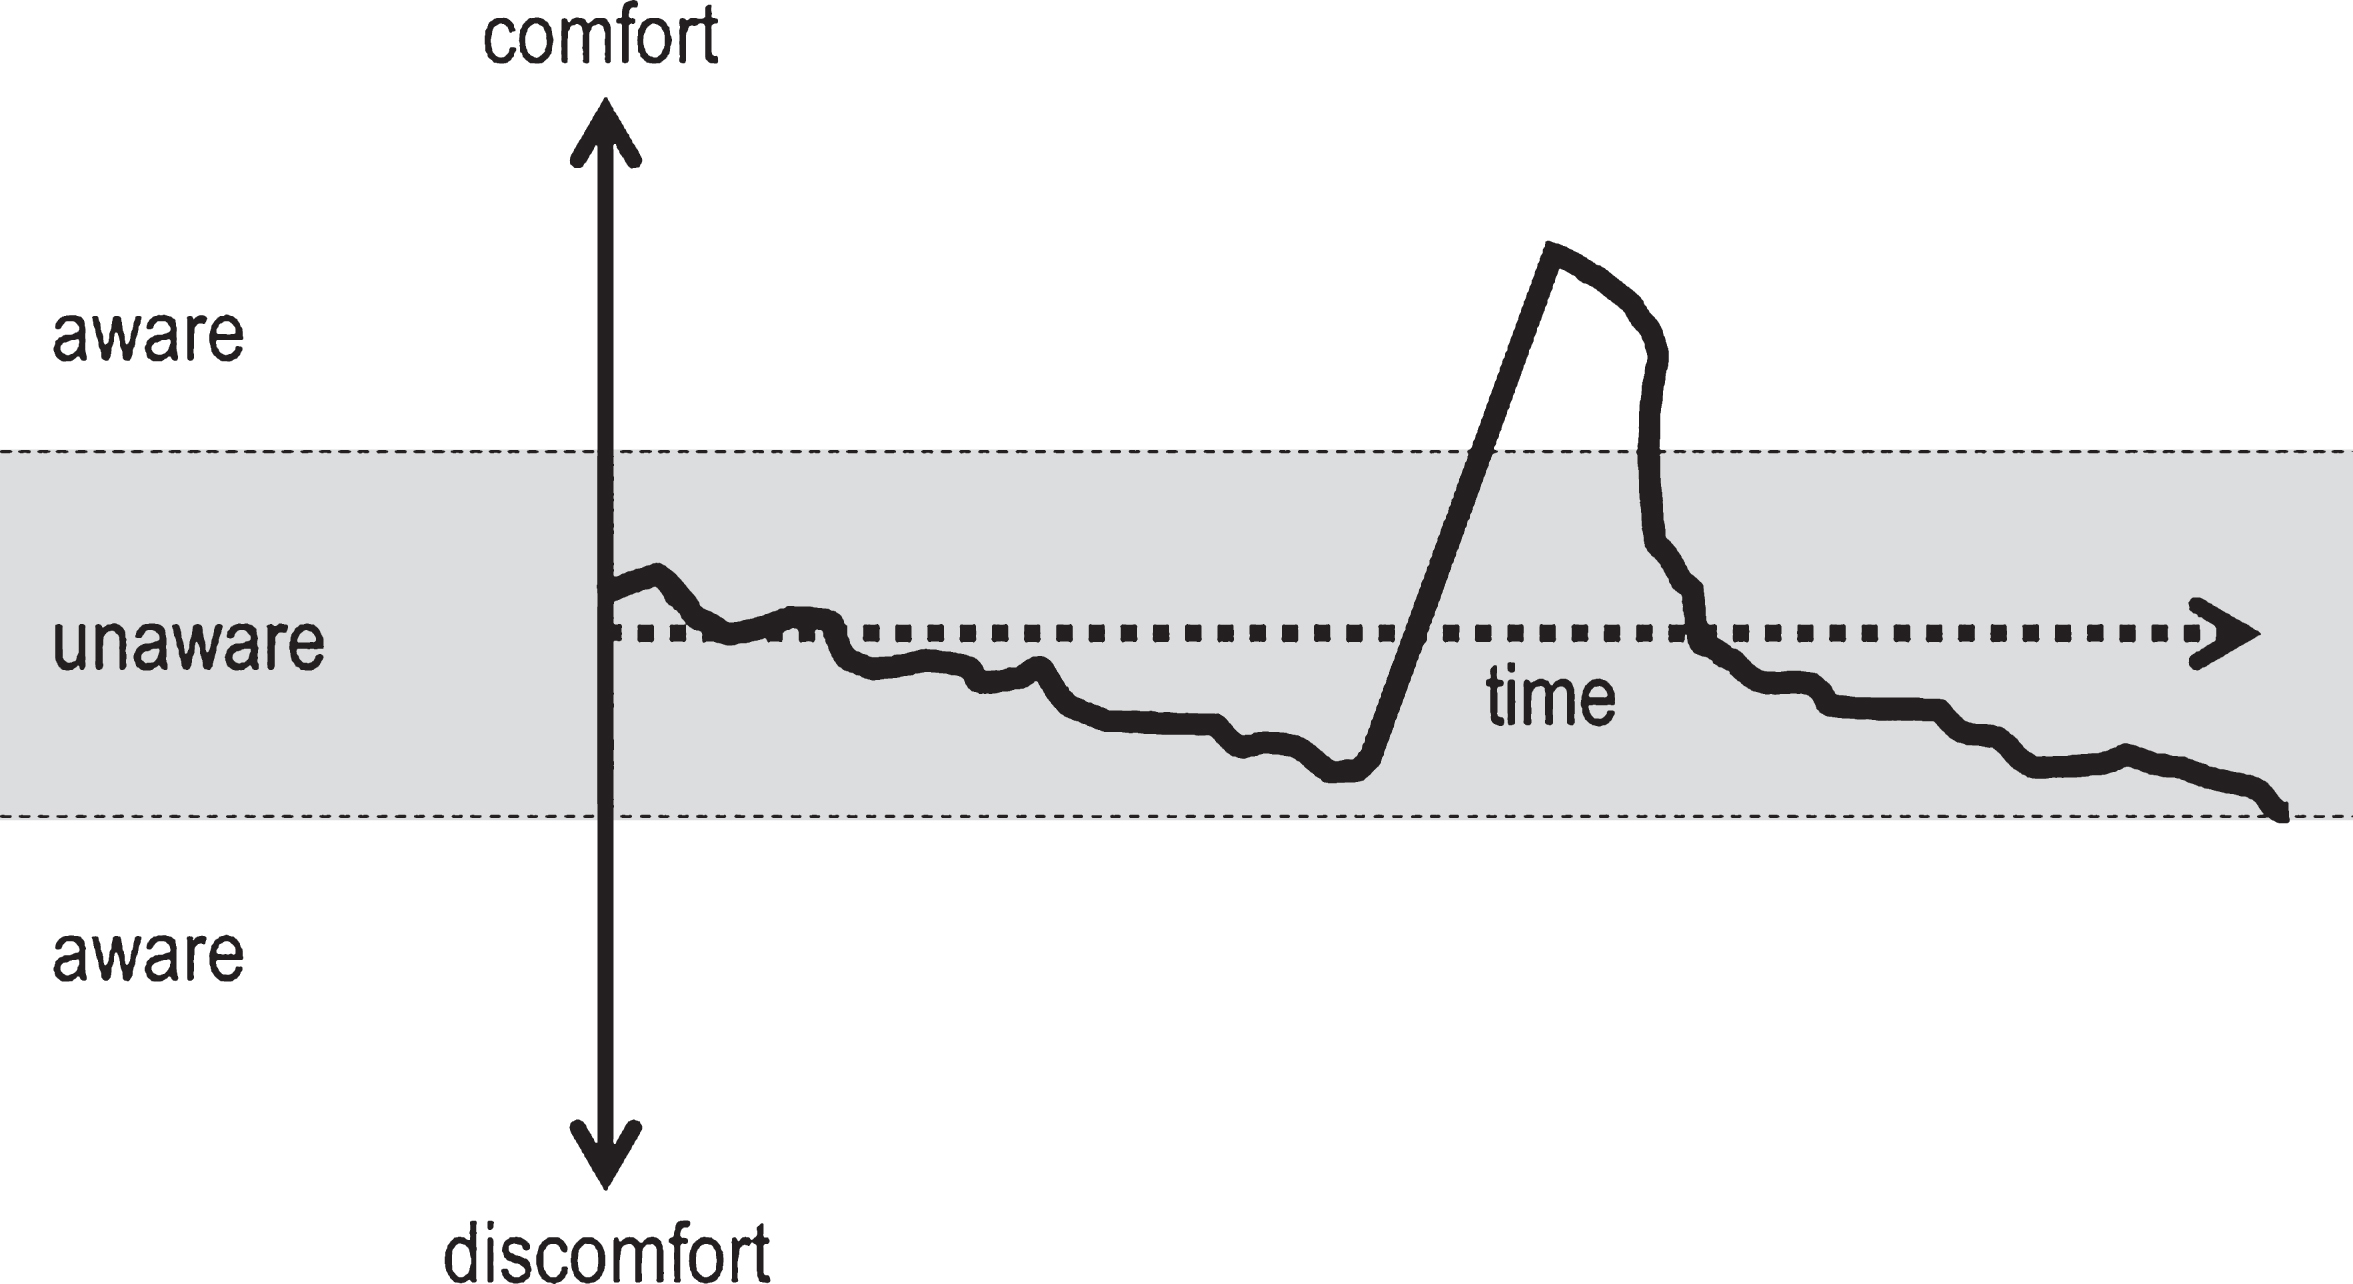 Model of the hypothetical curve of how the comfort reduces slowly and then increases steeply, causing humans to become aware of the comfort.